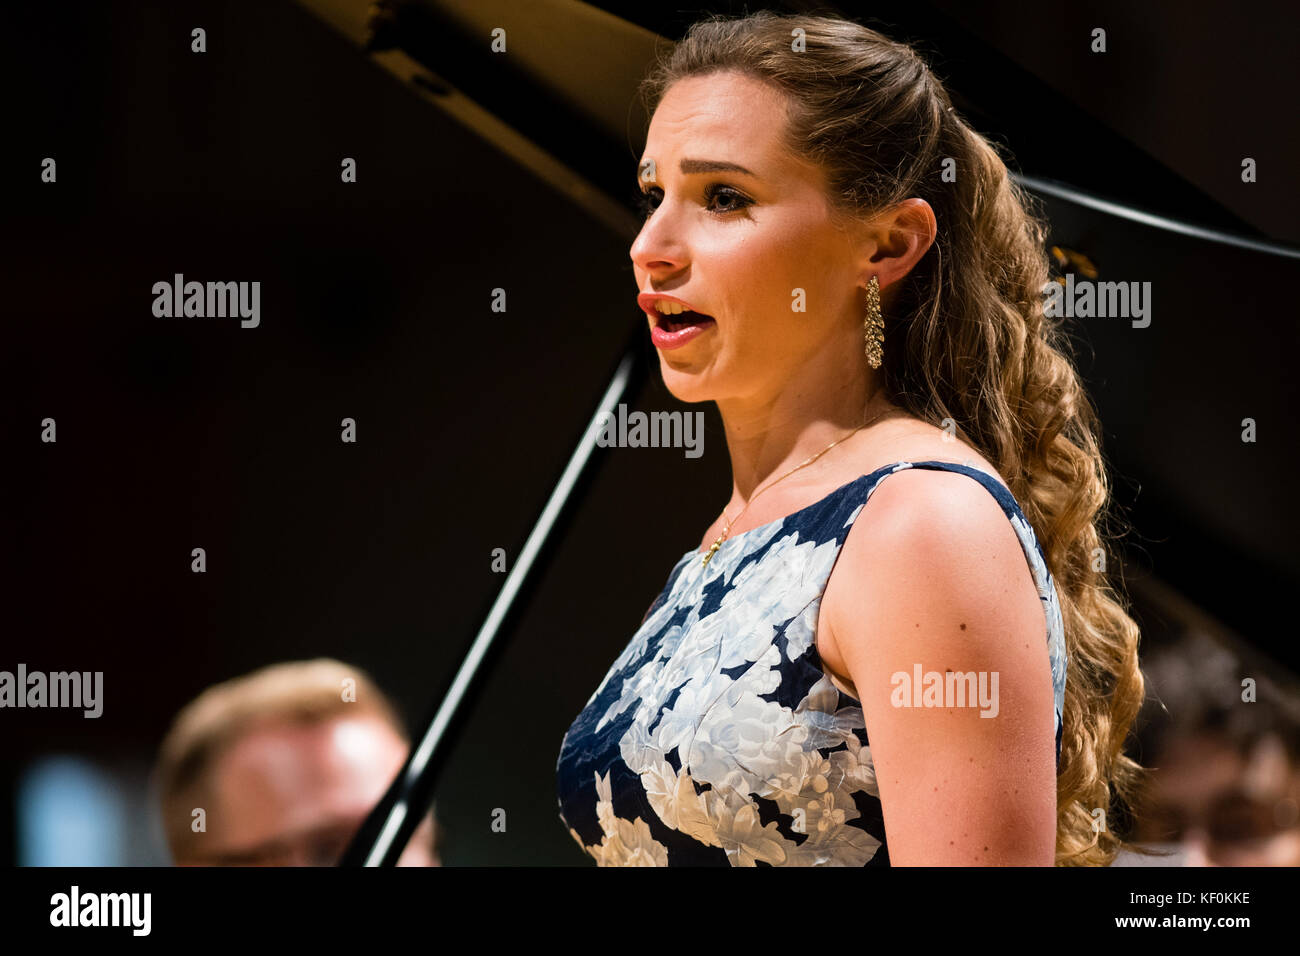 Rosanna Cooper, Mezzo-soprano,  performing on stage at MusicFest Aberystwyth July 2017 Stock Photo